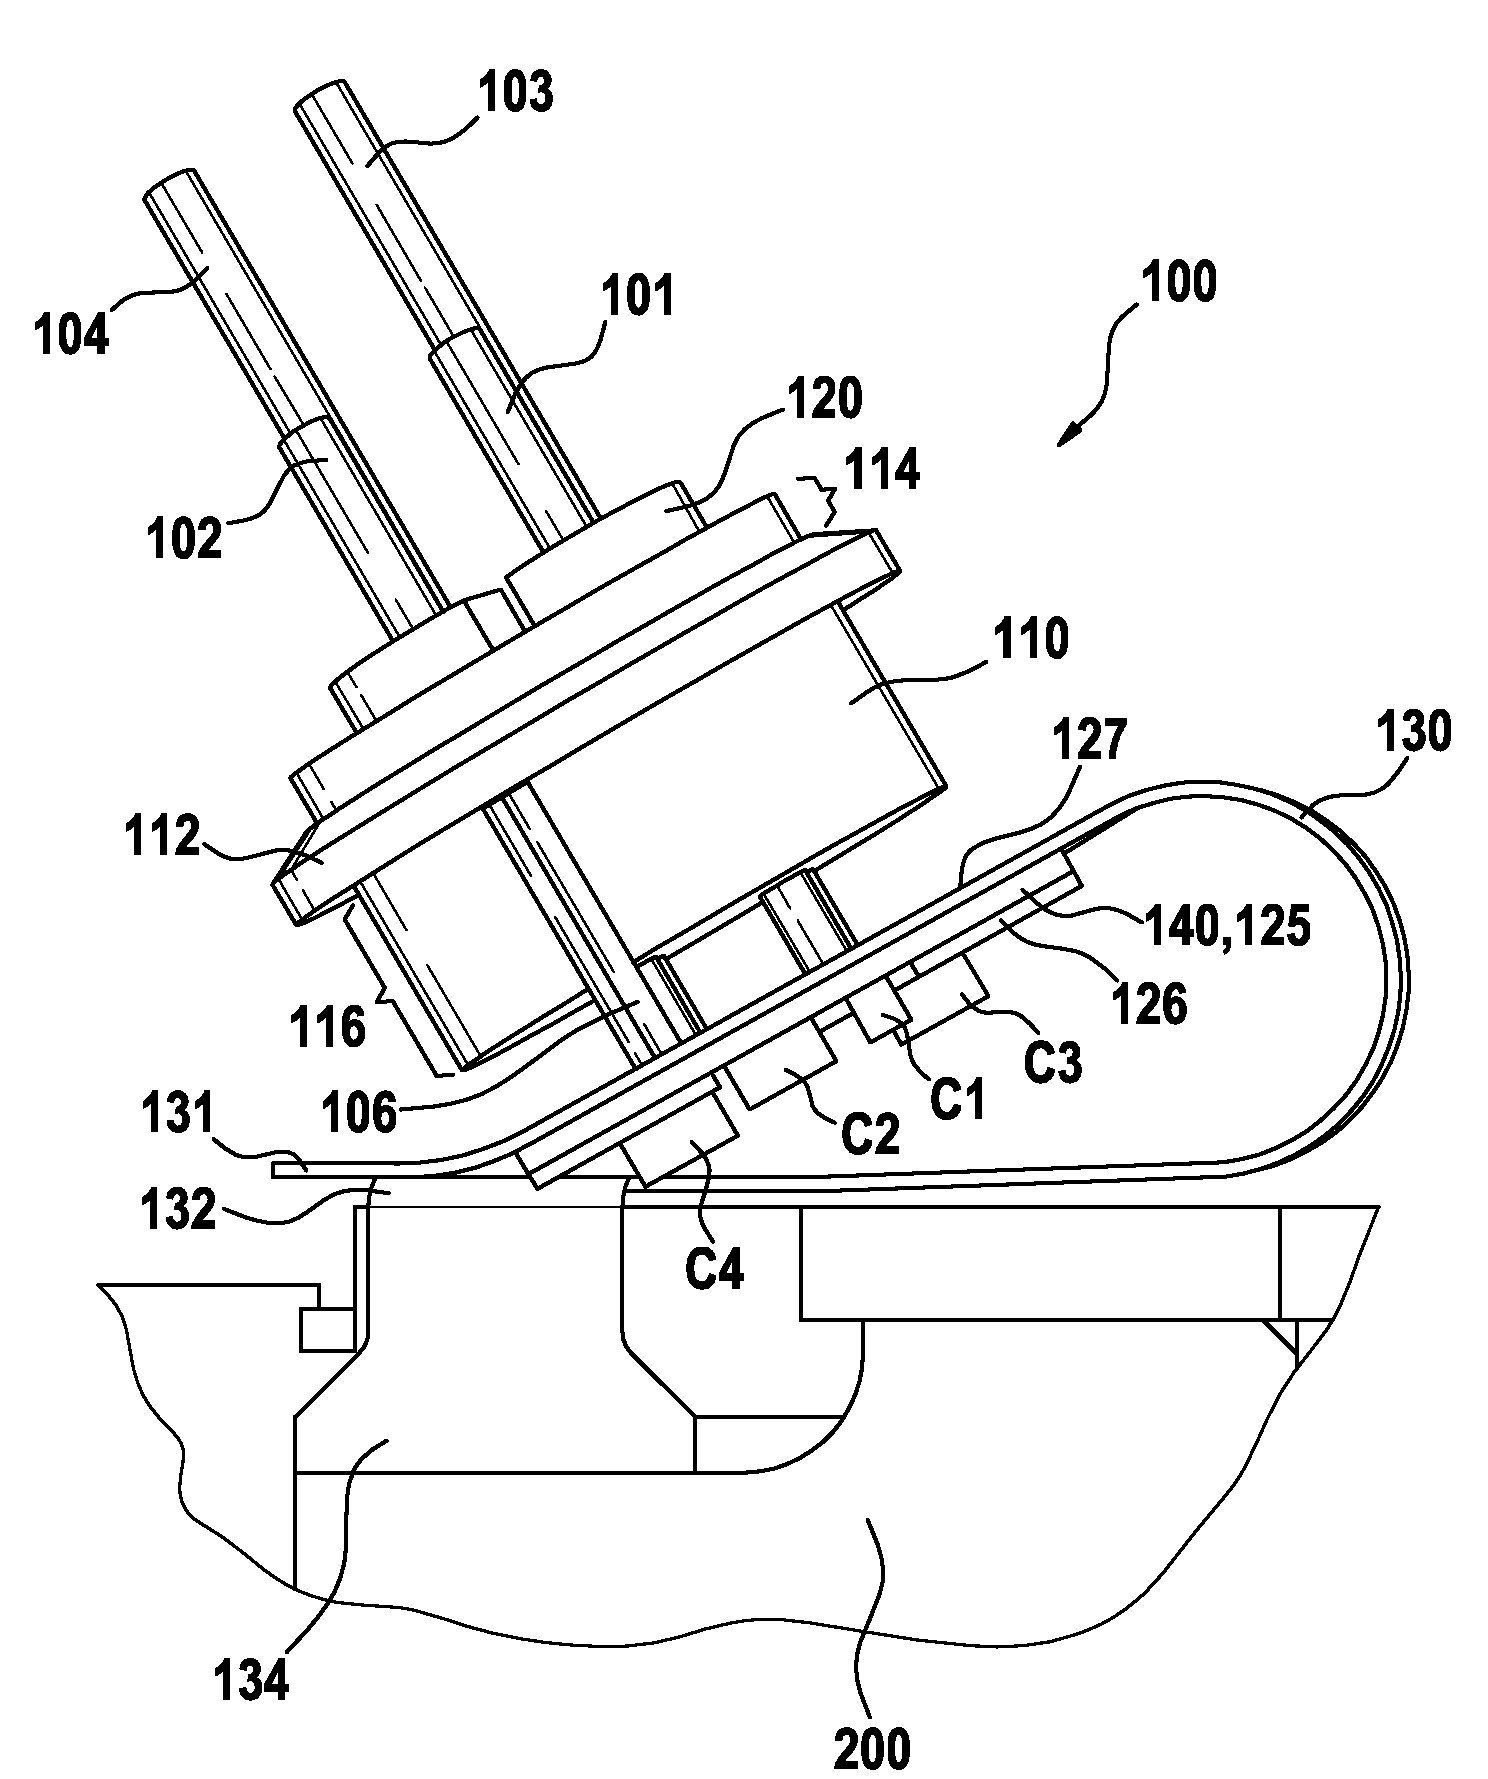 Filtering assembly and a feedthrough assembly